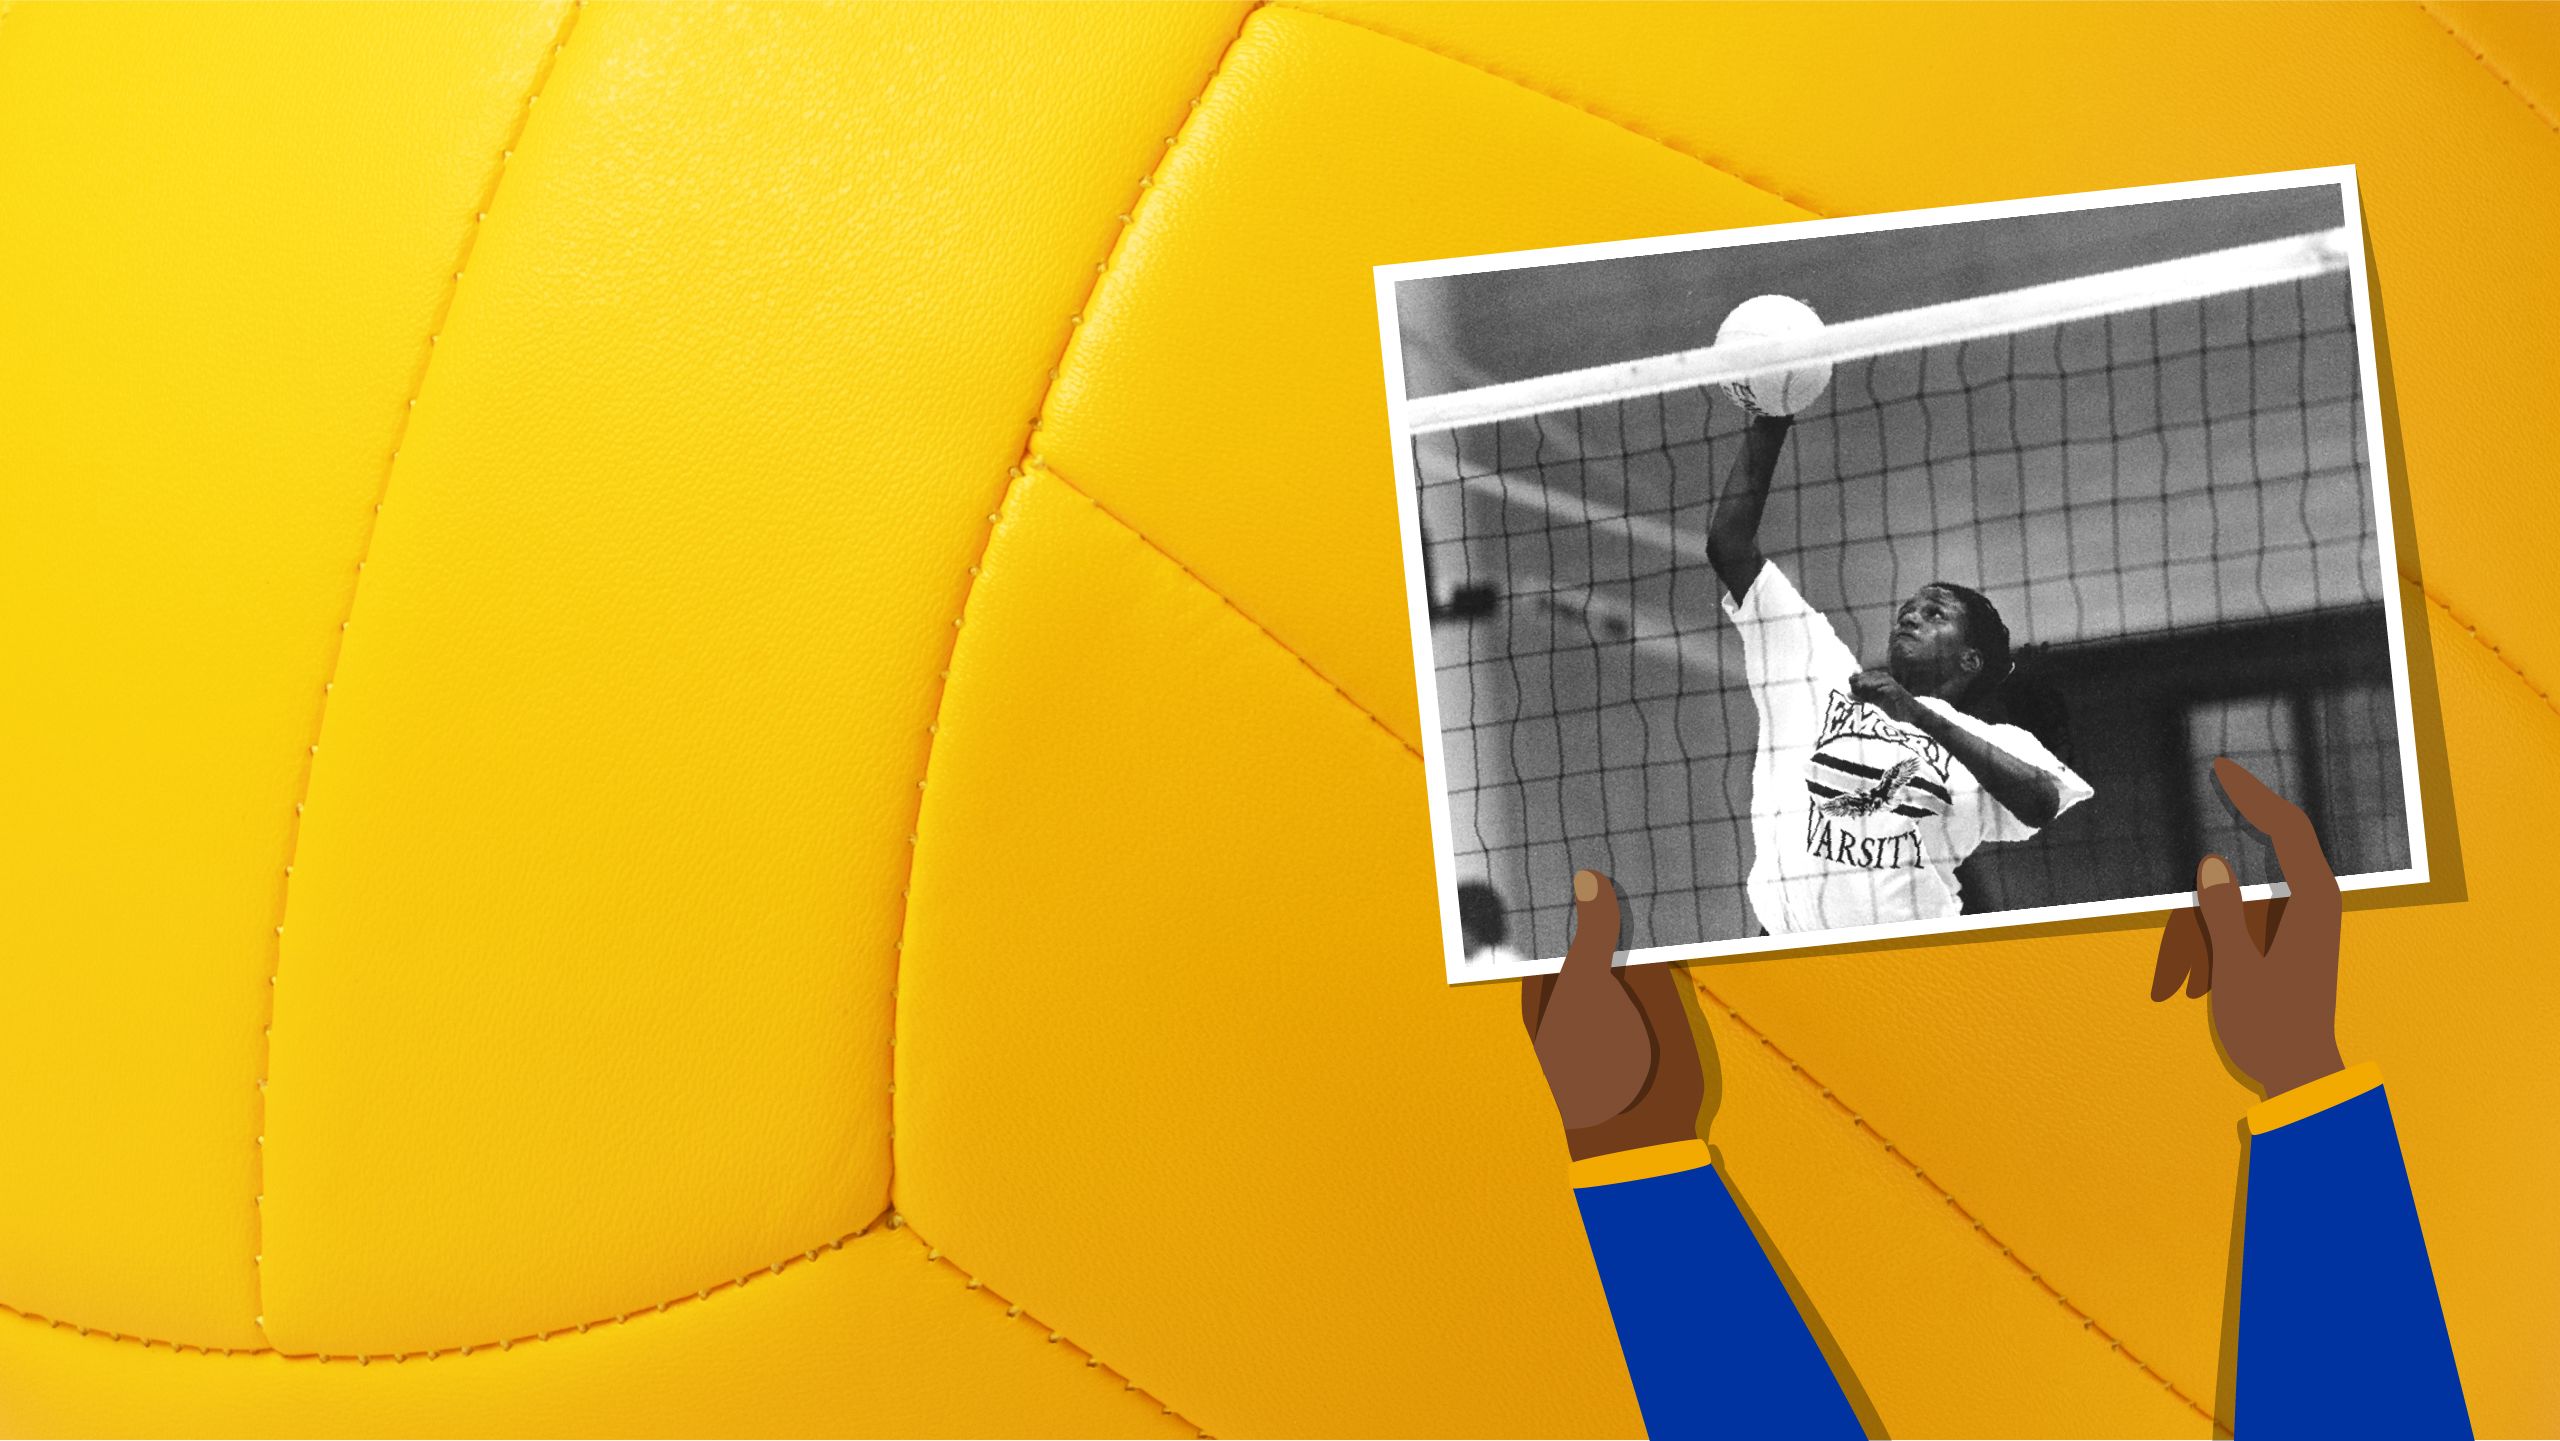 Emory College alumna Stacey Winston playing volleyball as a student in 1987